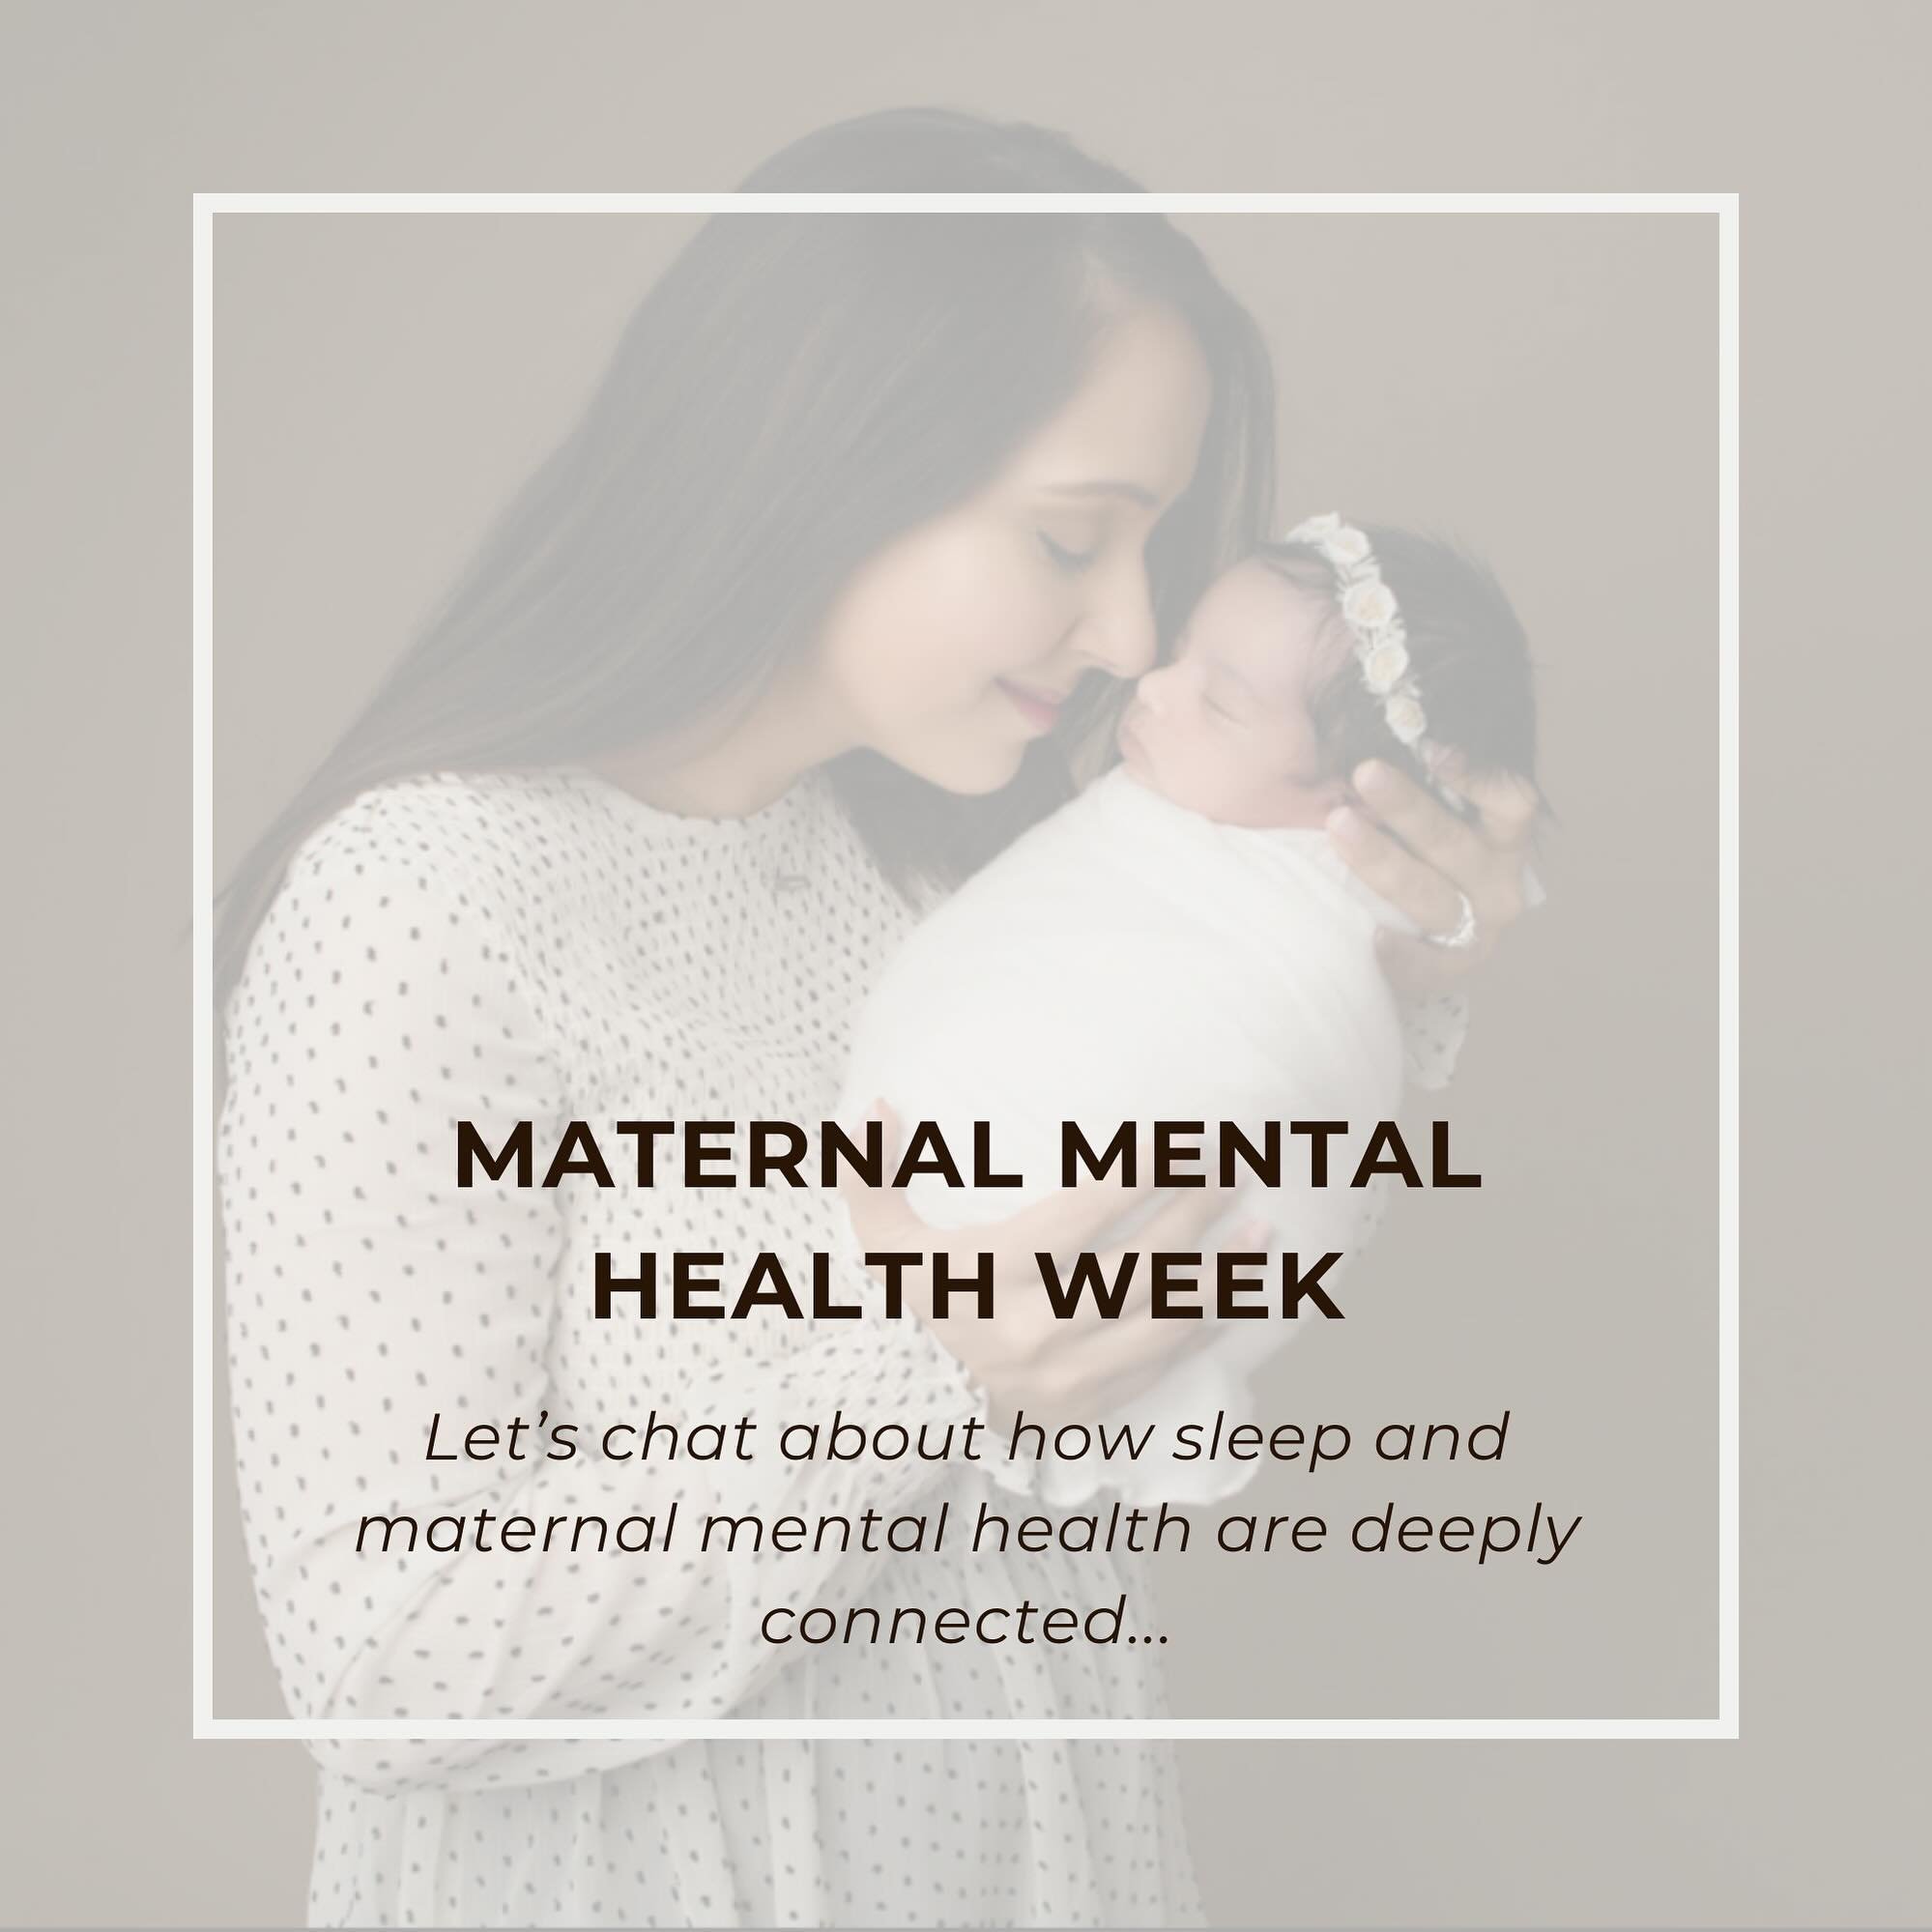 Let&rsquo;s chat about how sleep and maternal mental health are deeply connected, especially in those first few months after welcoming a new baby into the family. 

🧐You know, research has shown that when moms face ongoing sleep struggles after havi